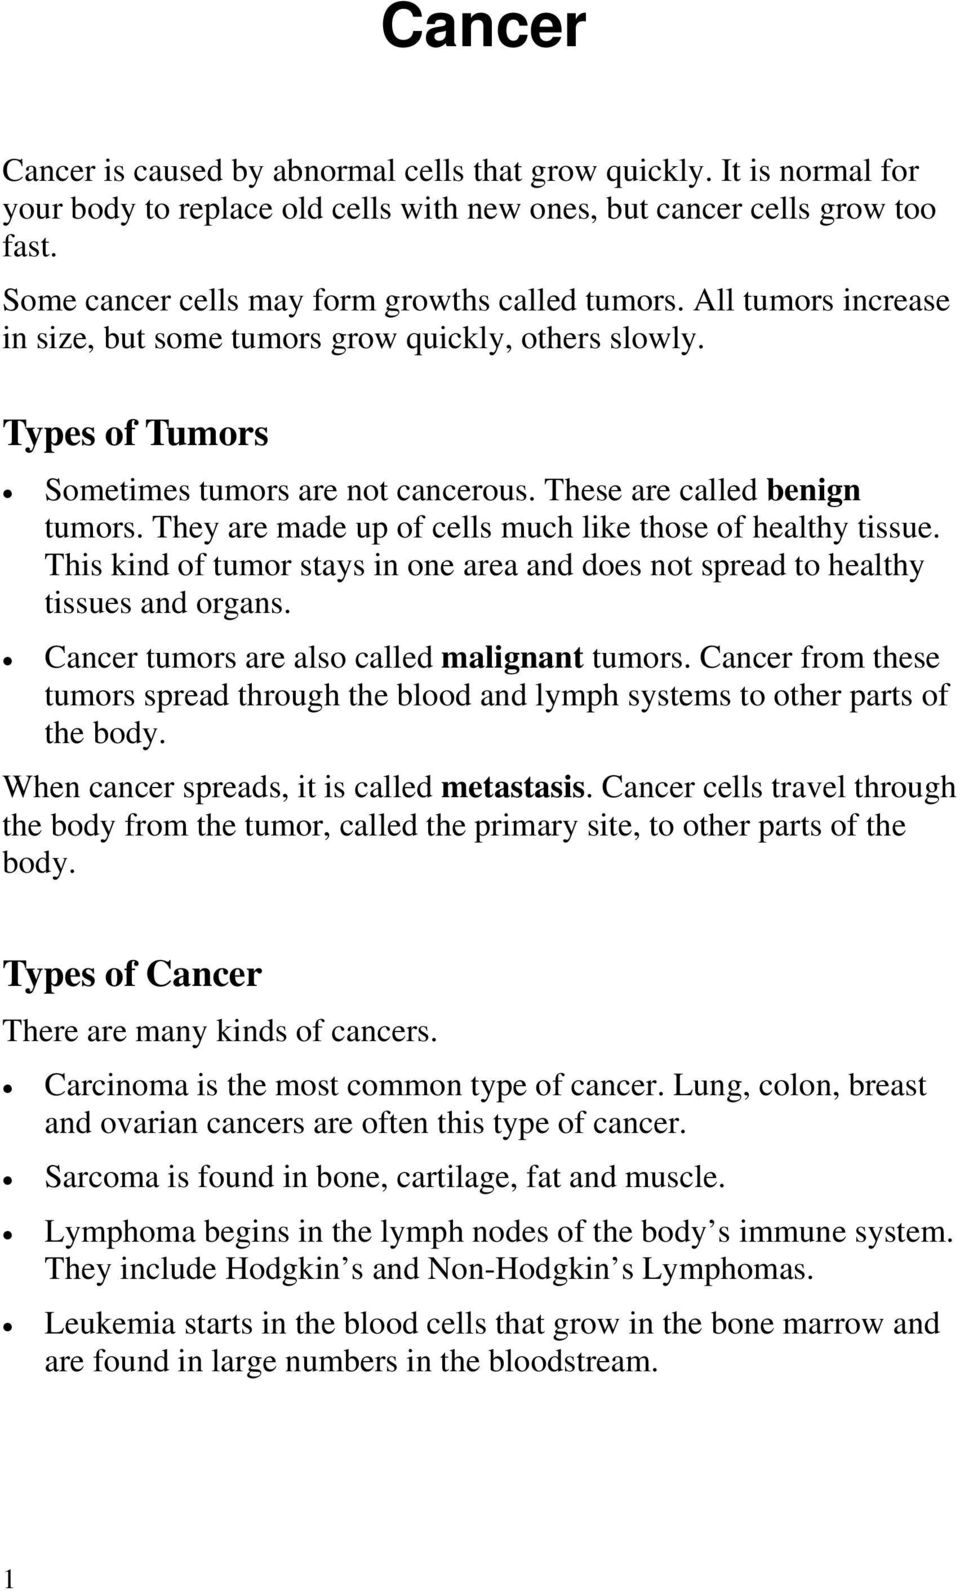 These are called benign tumors. They are made up of cells much like those of healthy tissue. This kind of tumor stays in one area and does not spread to healthy tissues and organs.